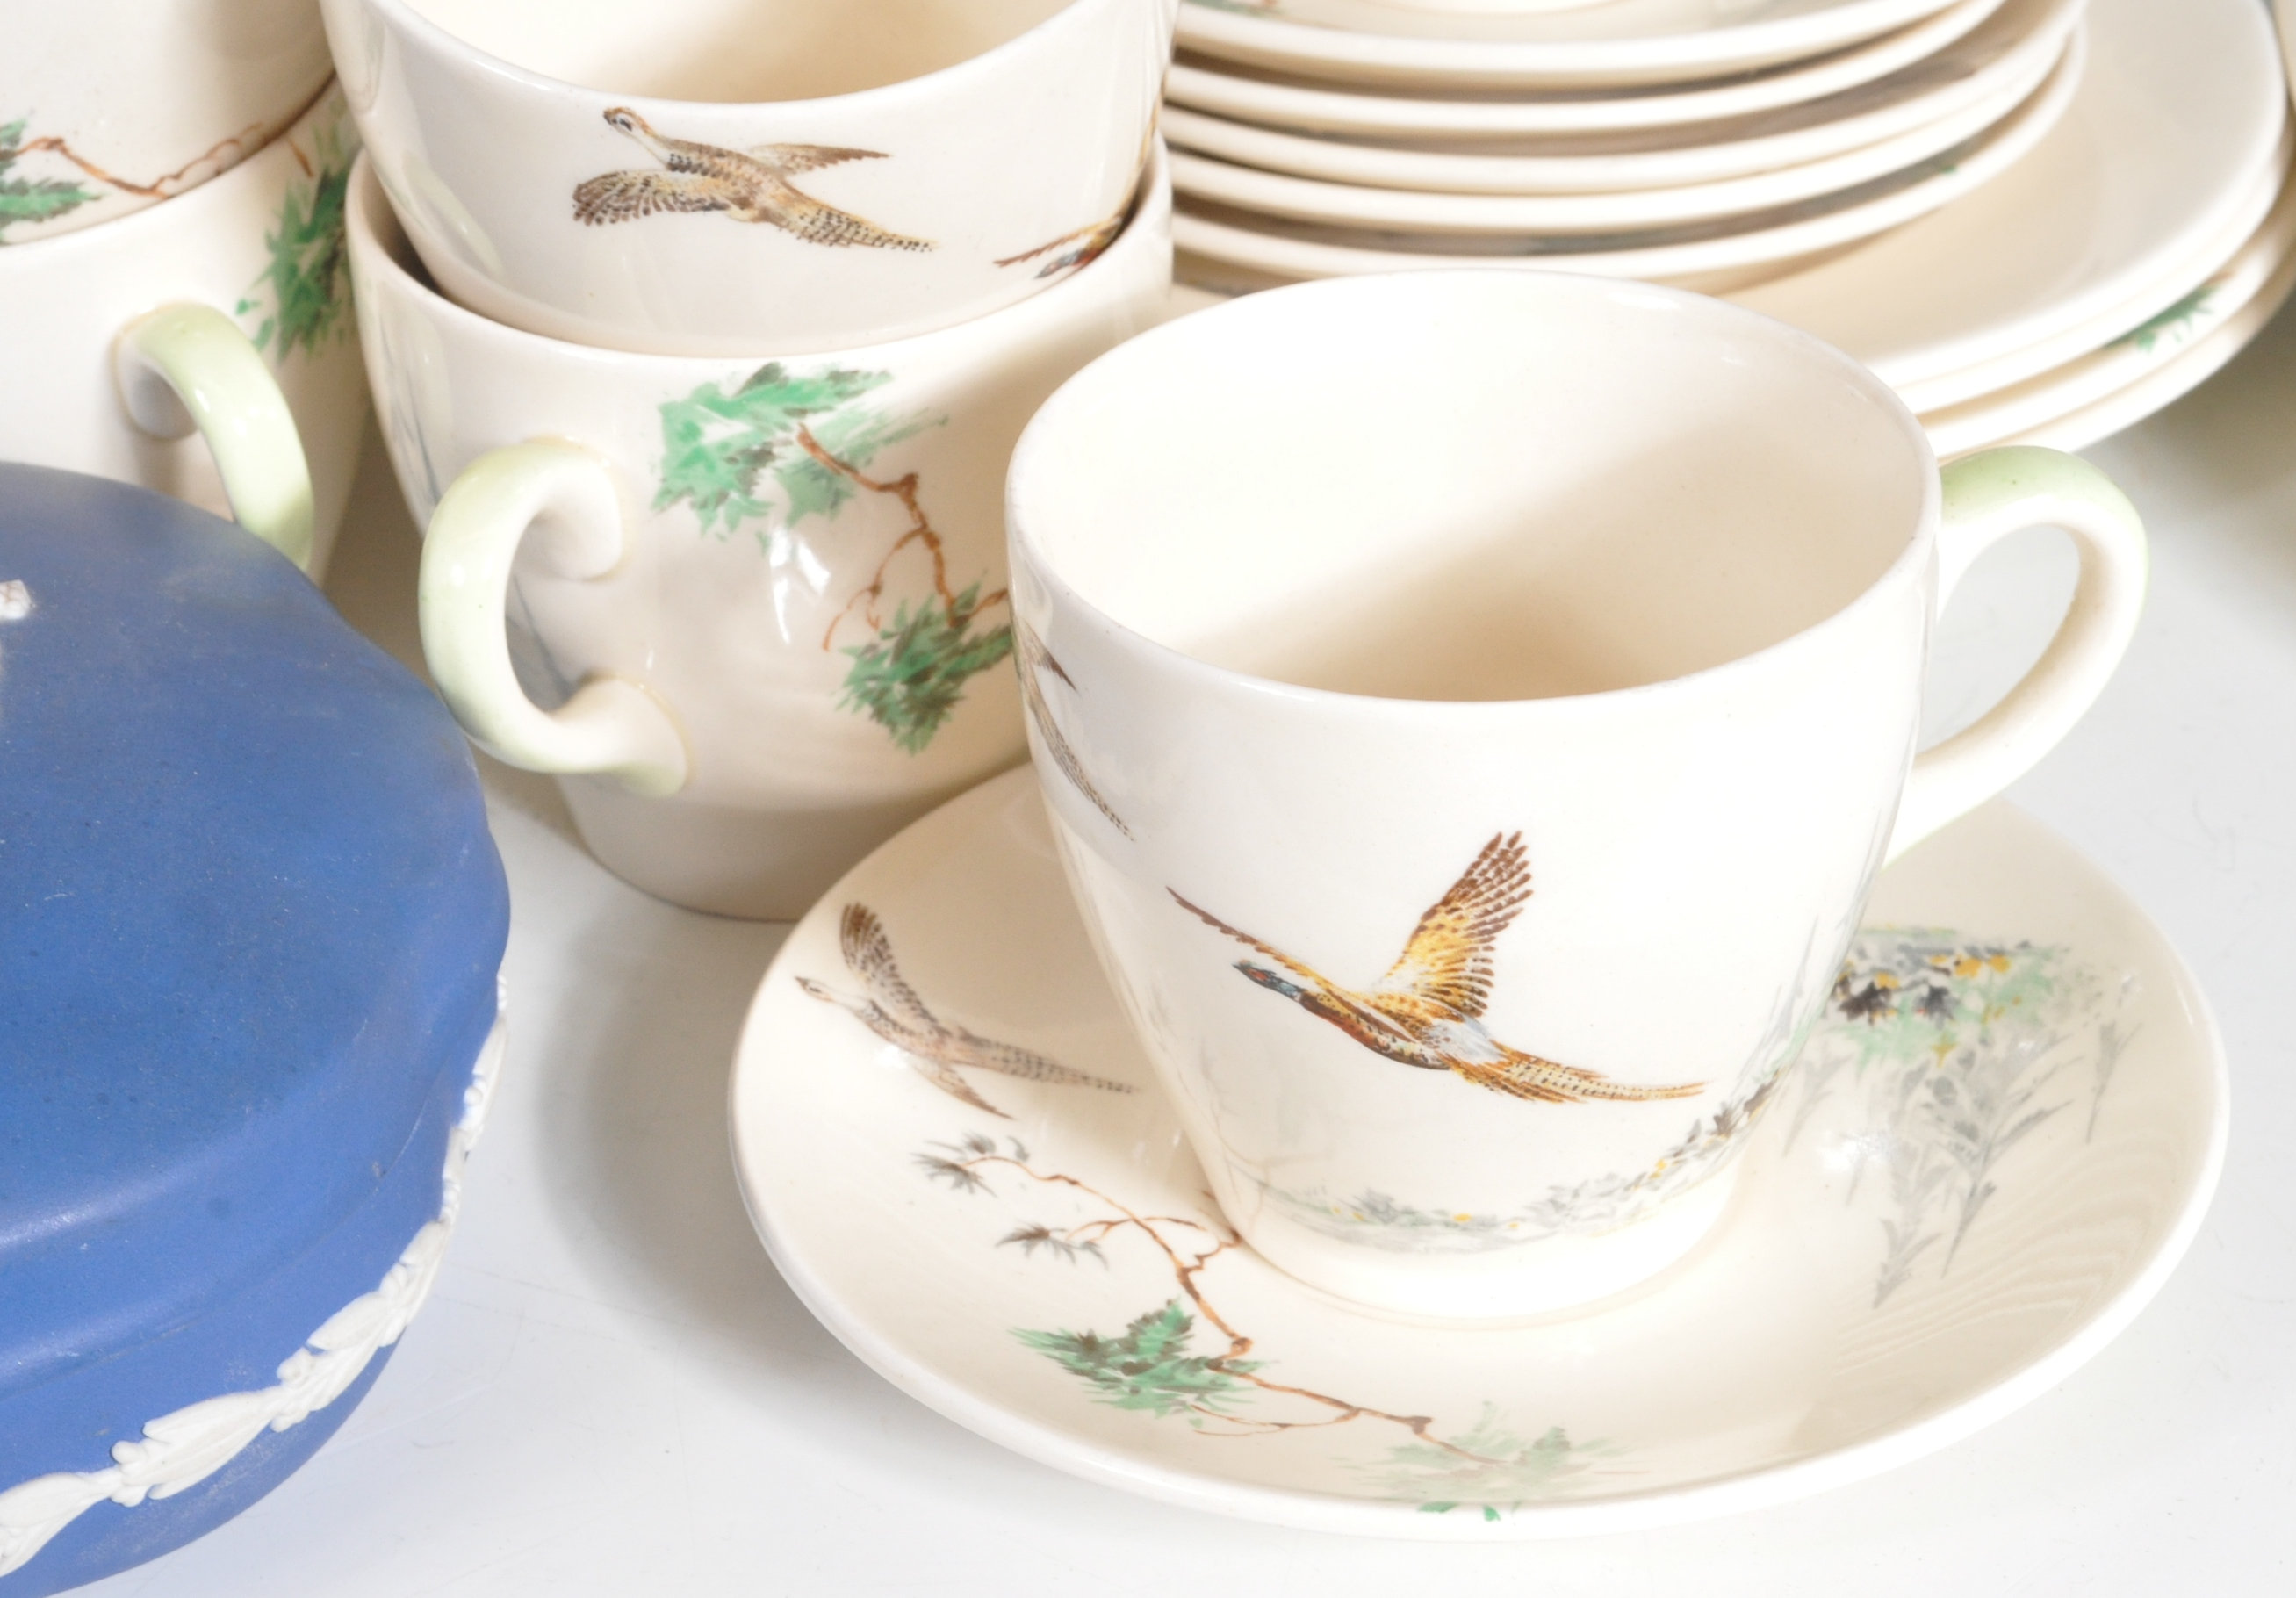 ROYAL DOULTON COPPICE PATTERN DINNER SERVICE - Image 3 of 11